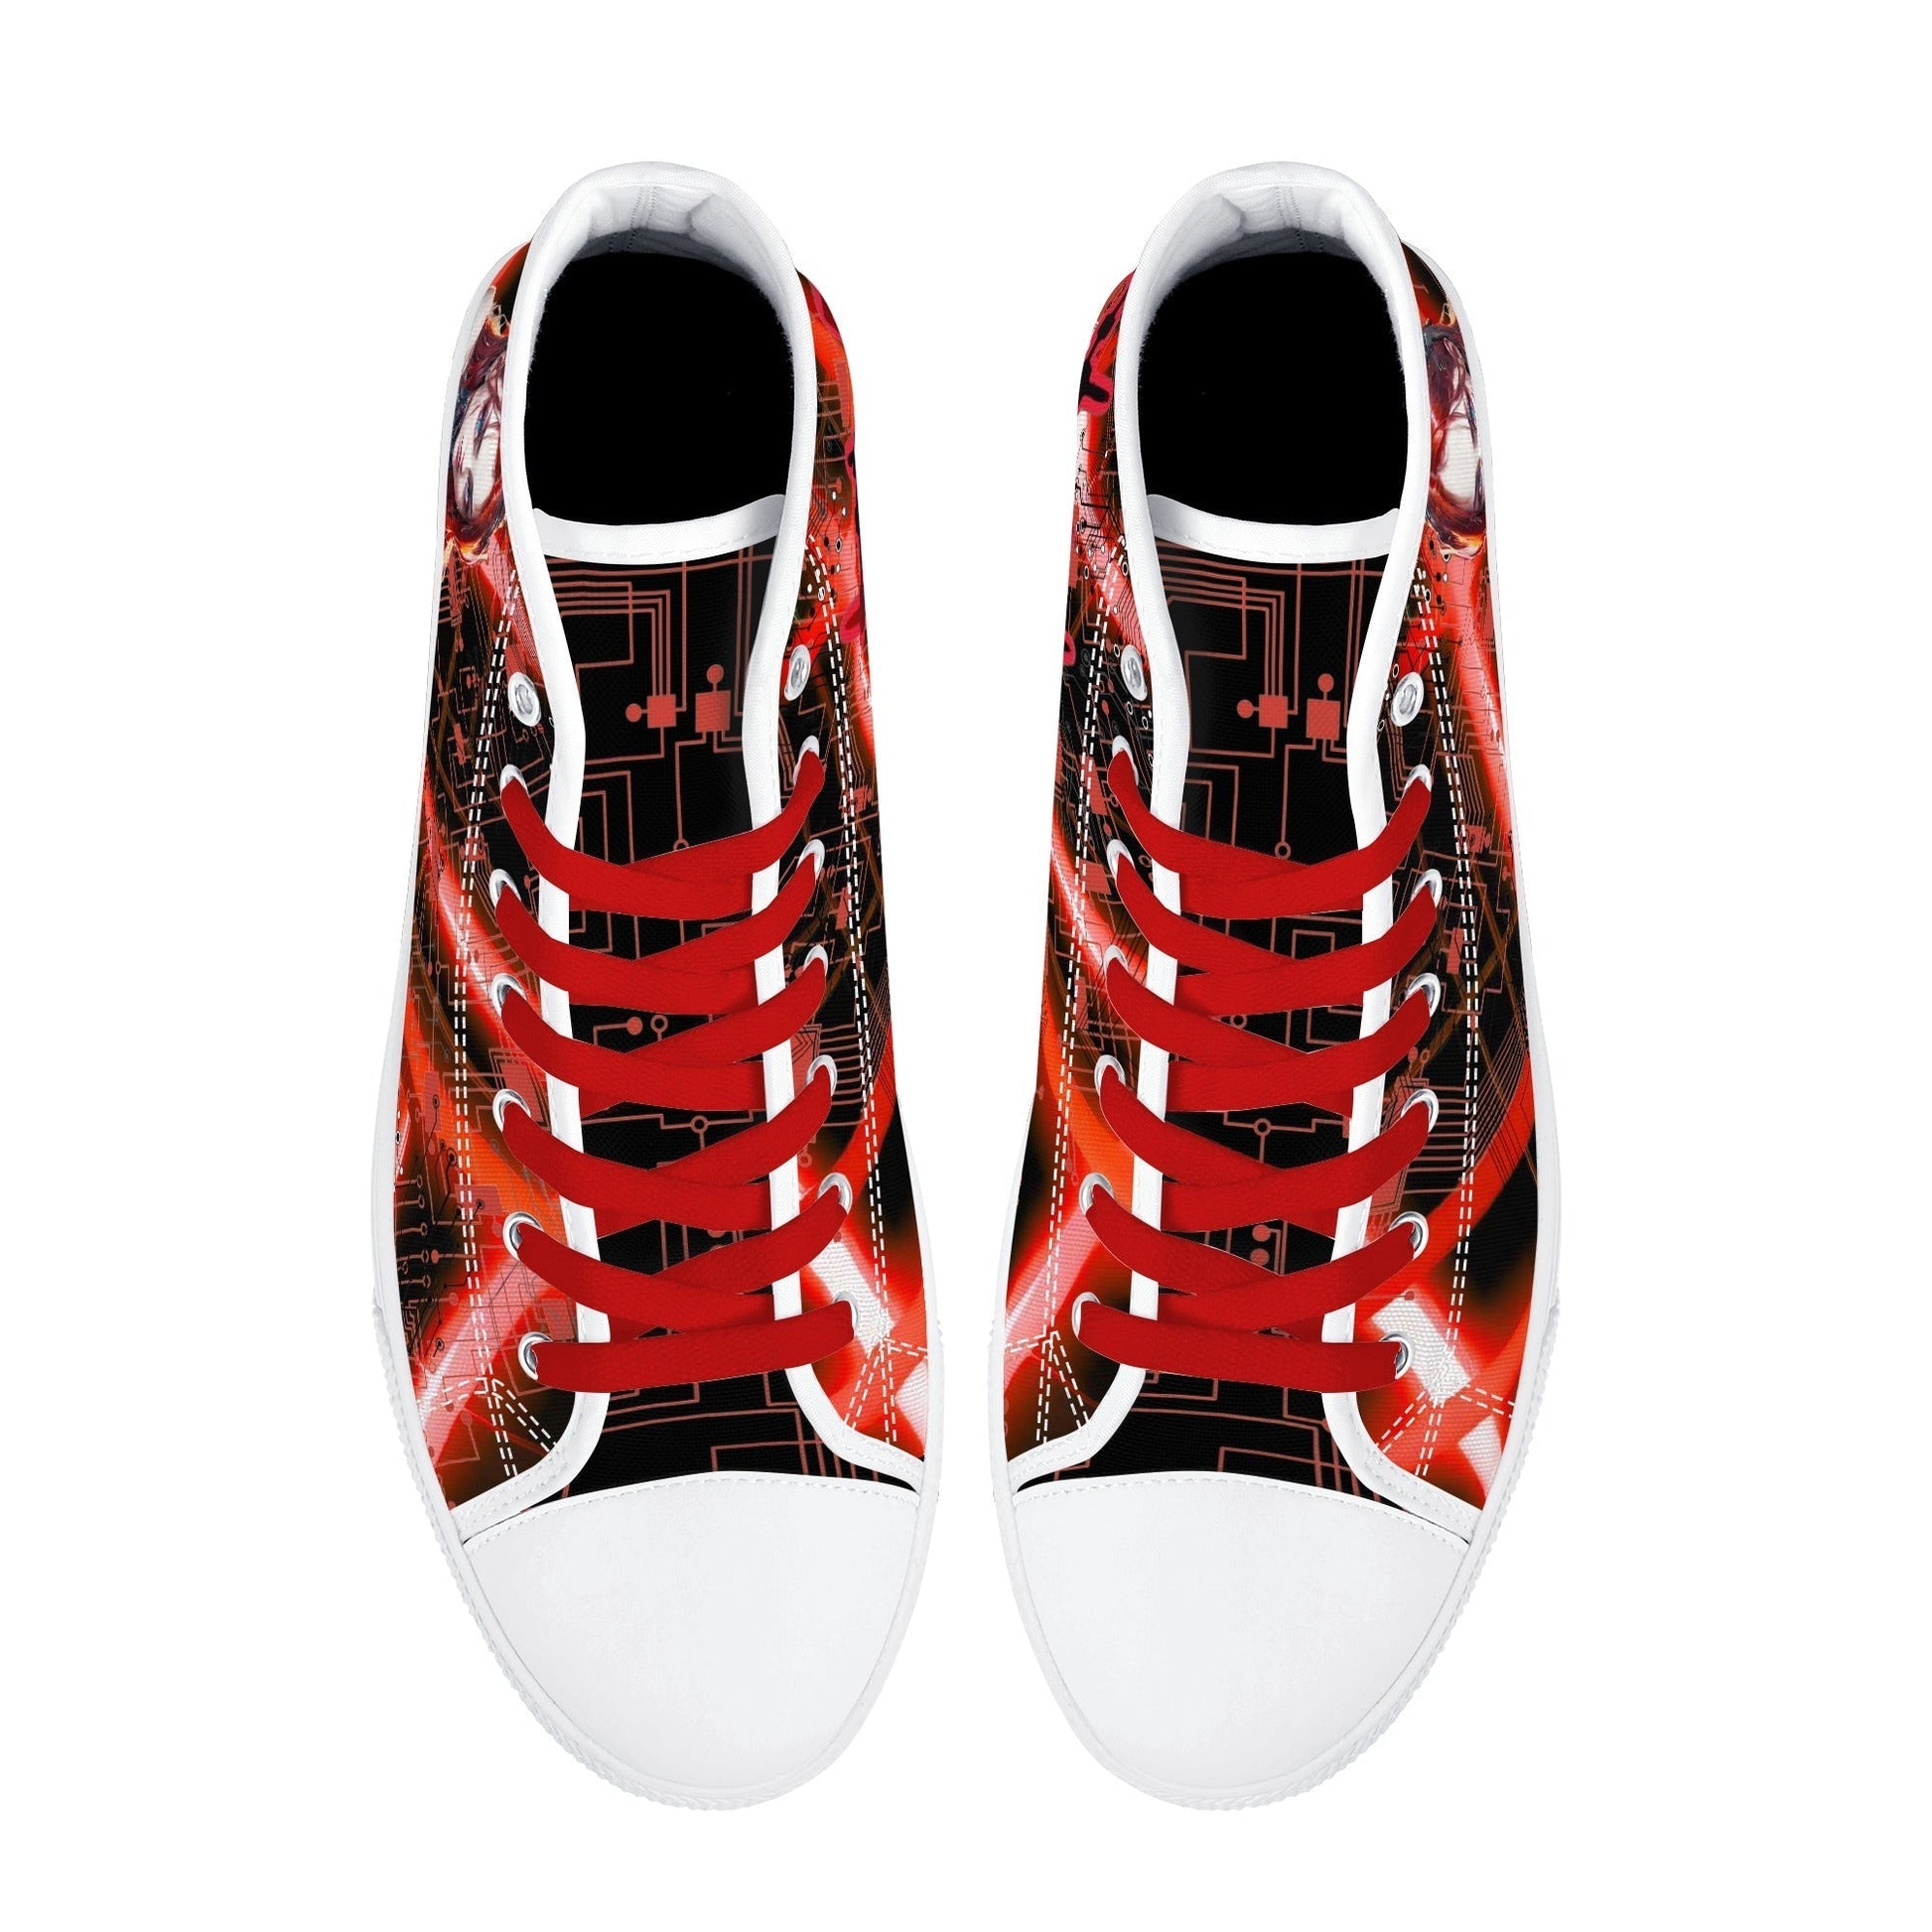 Stand out  with the  Overload Womens High Top Canvas Shoes  available at Hey Nugget. Grab yours today!